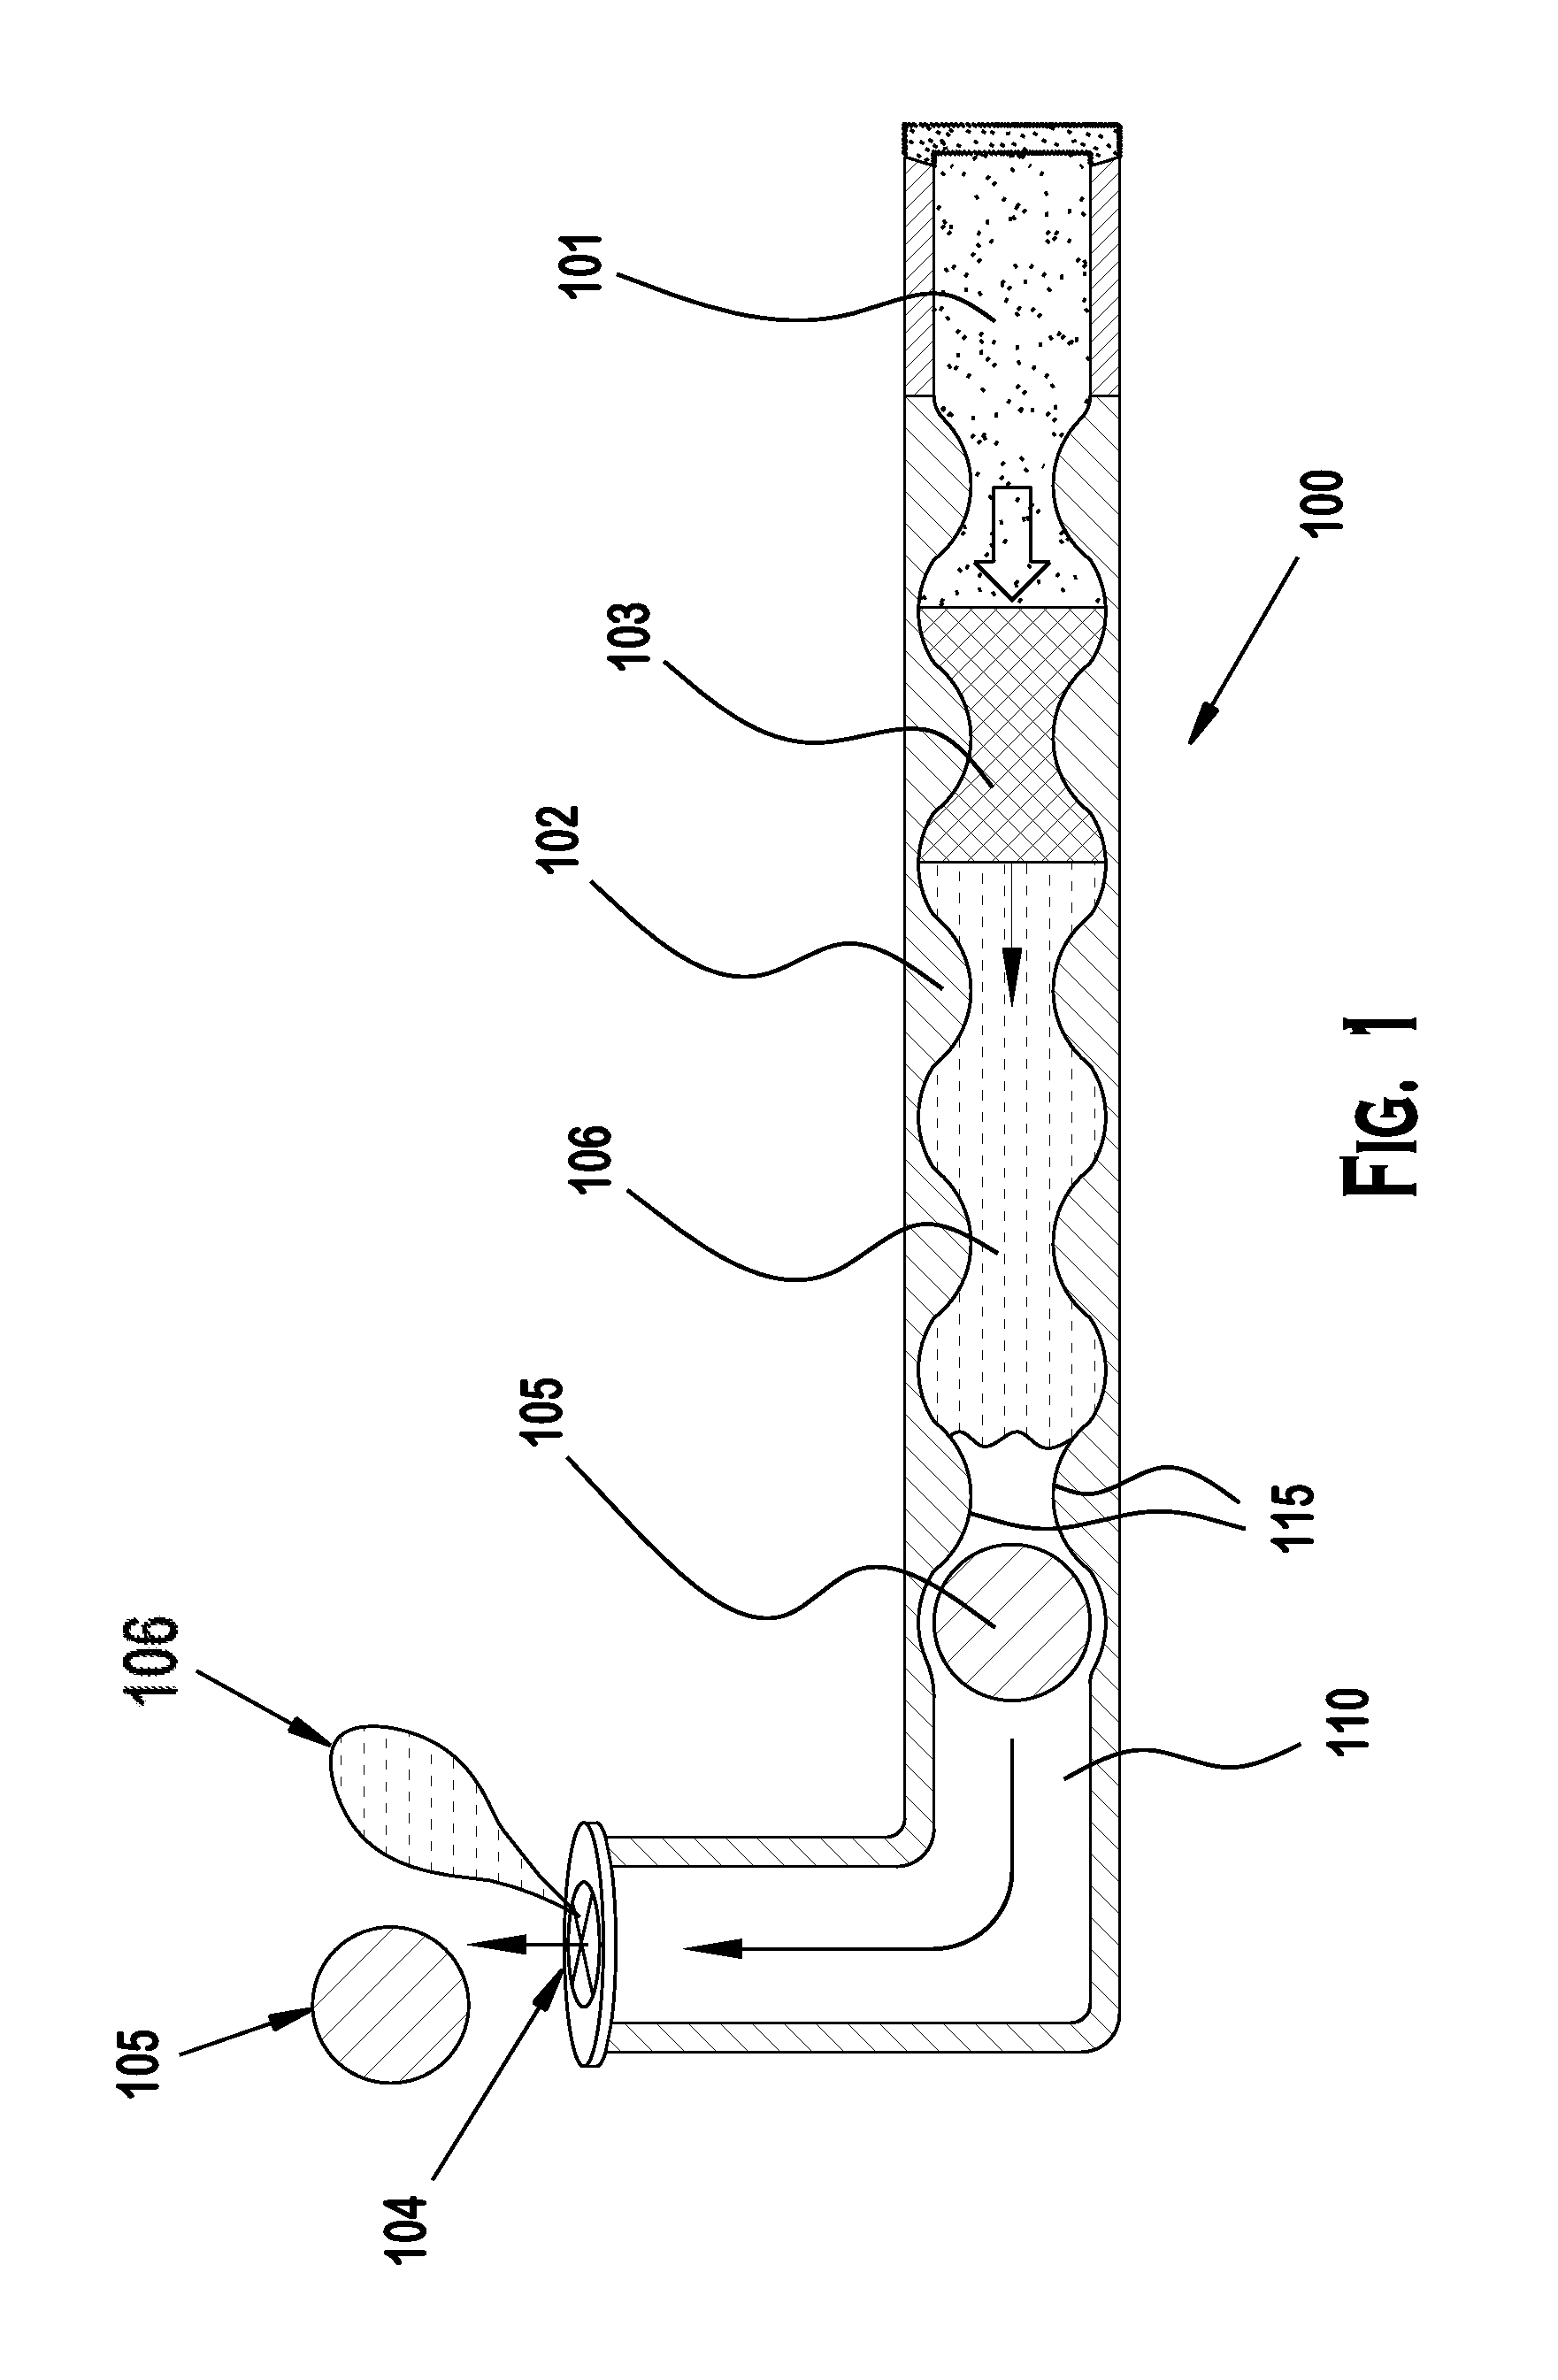 Punctal plugs with continuous or pulsatile drug release mechanism